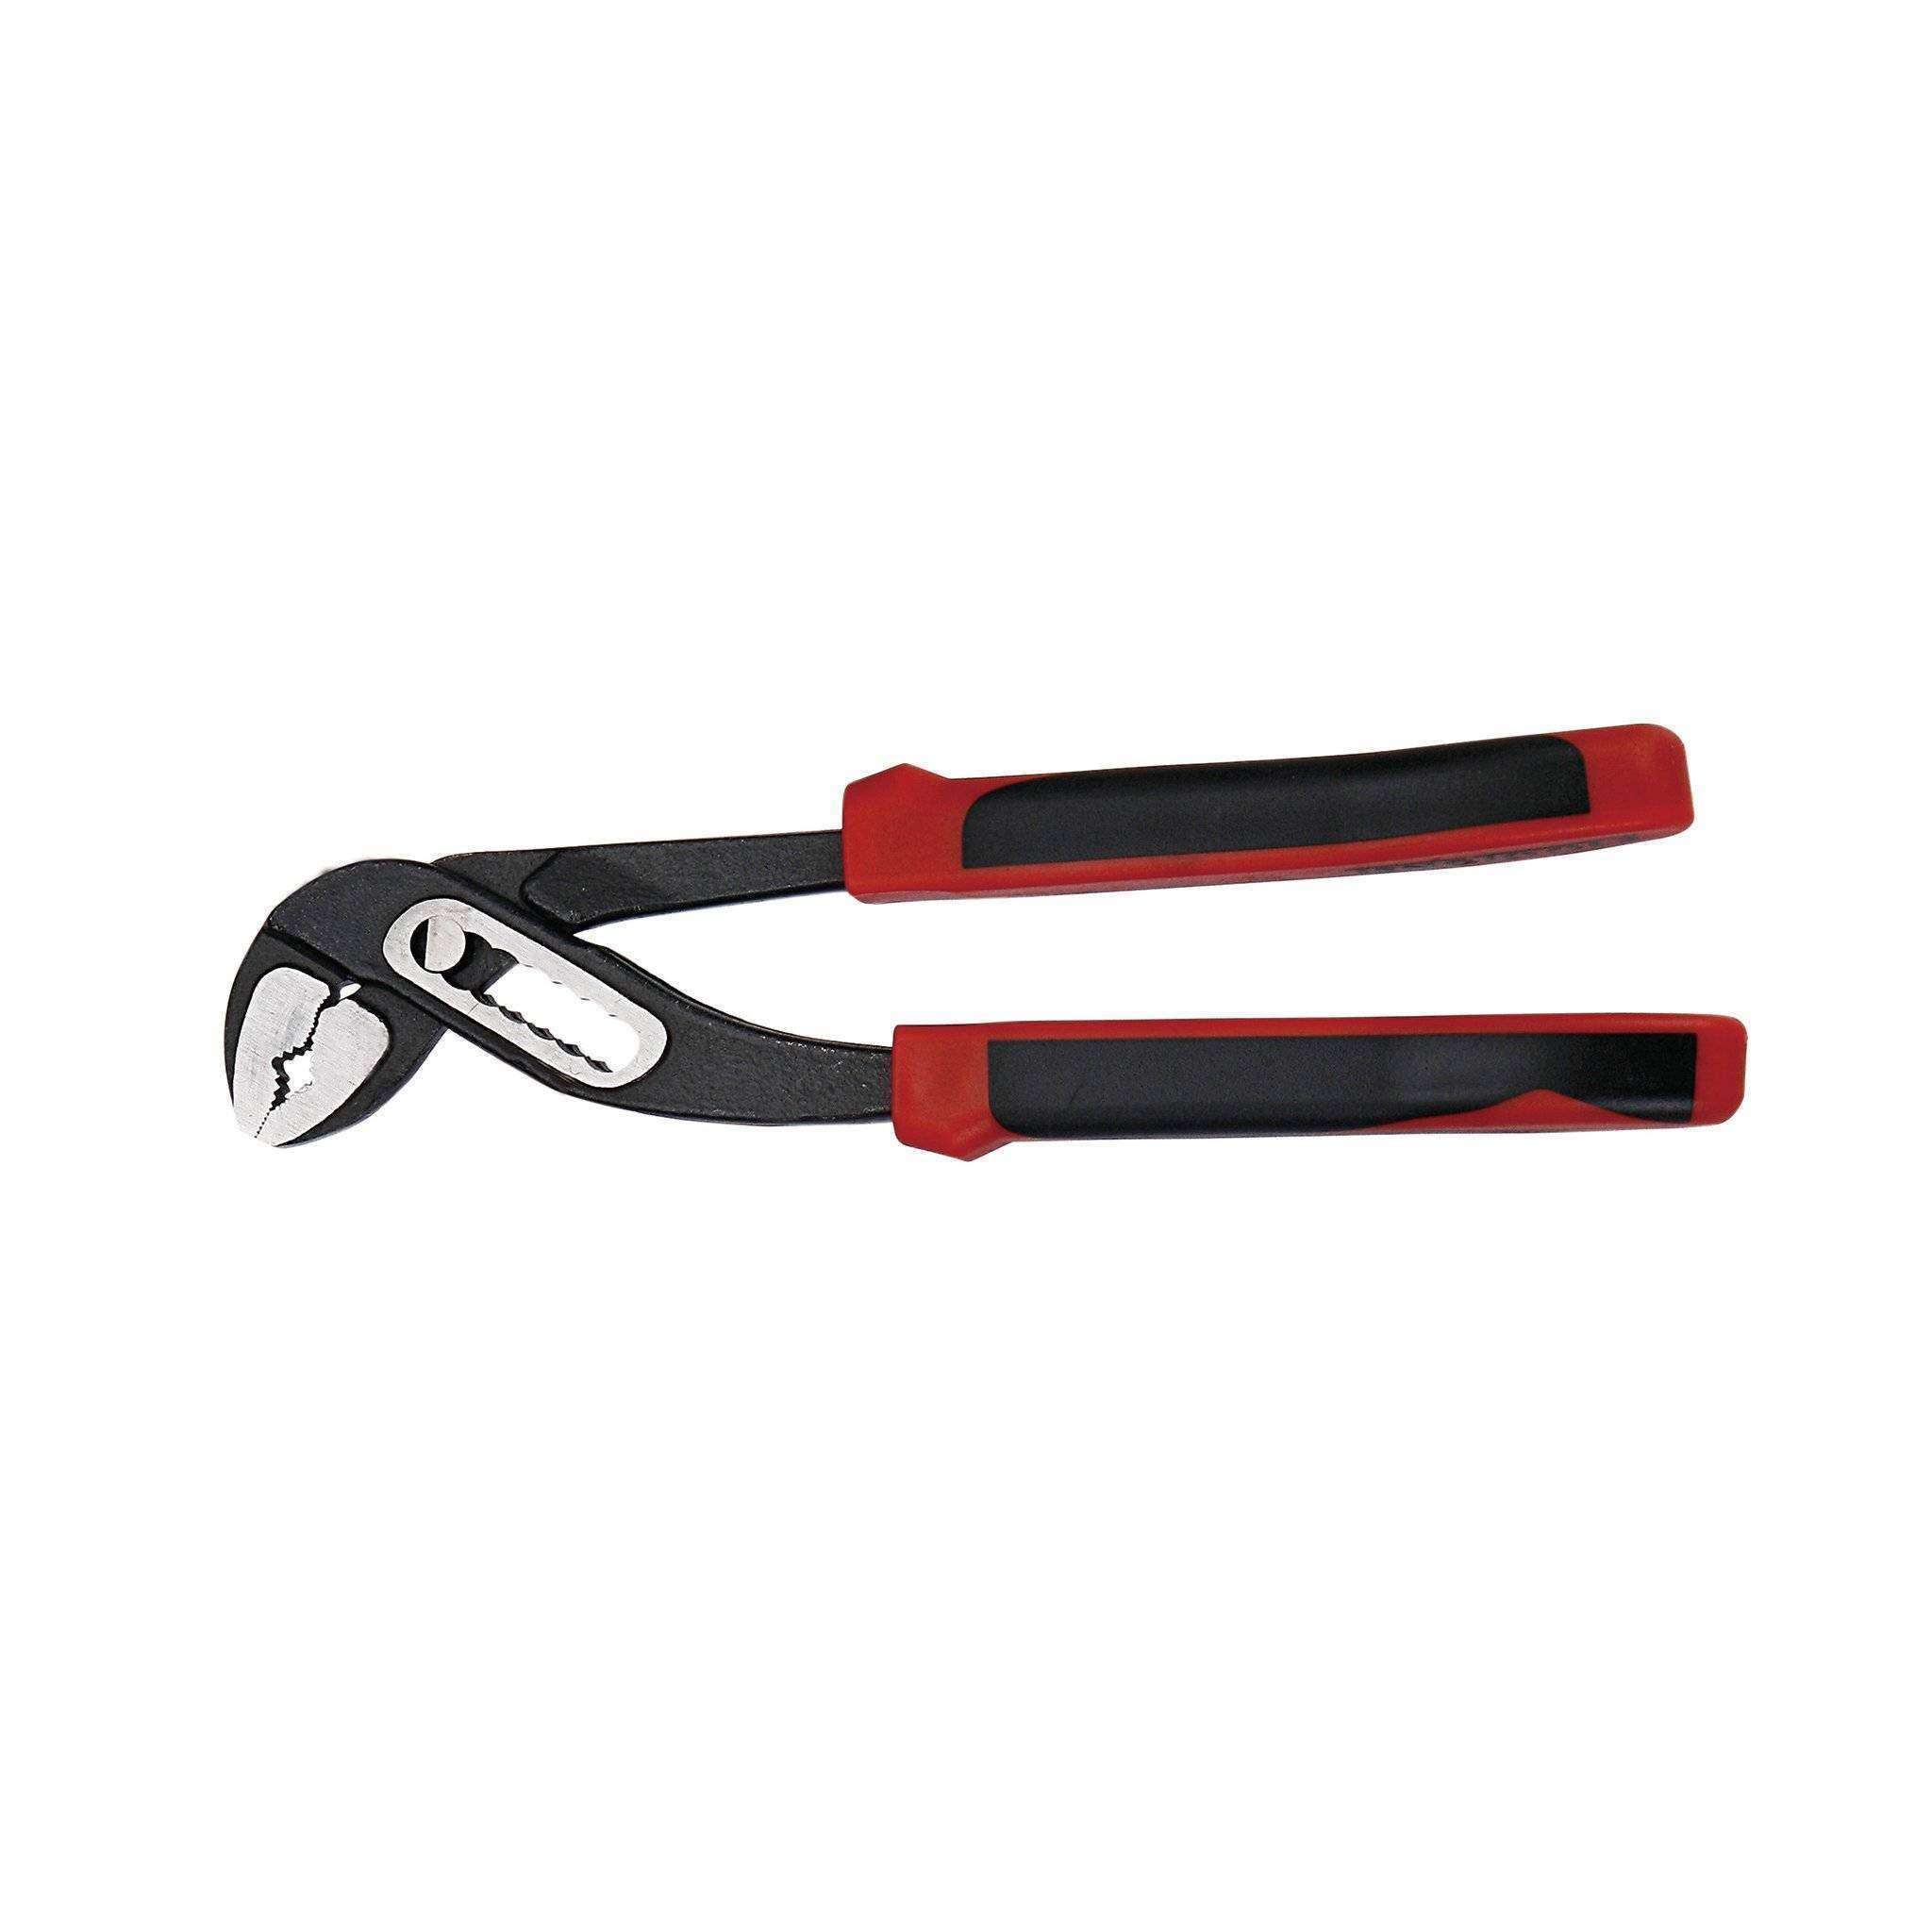 Teng Tools 7 Inch TPR Grip Slip Joint / Water Pump Pliers - MB481-7T